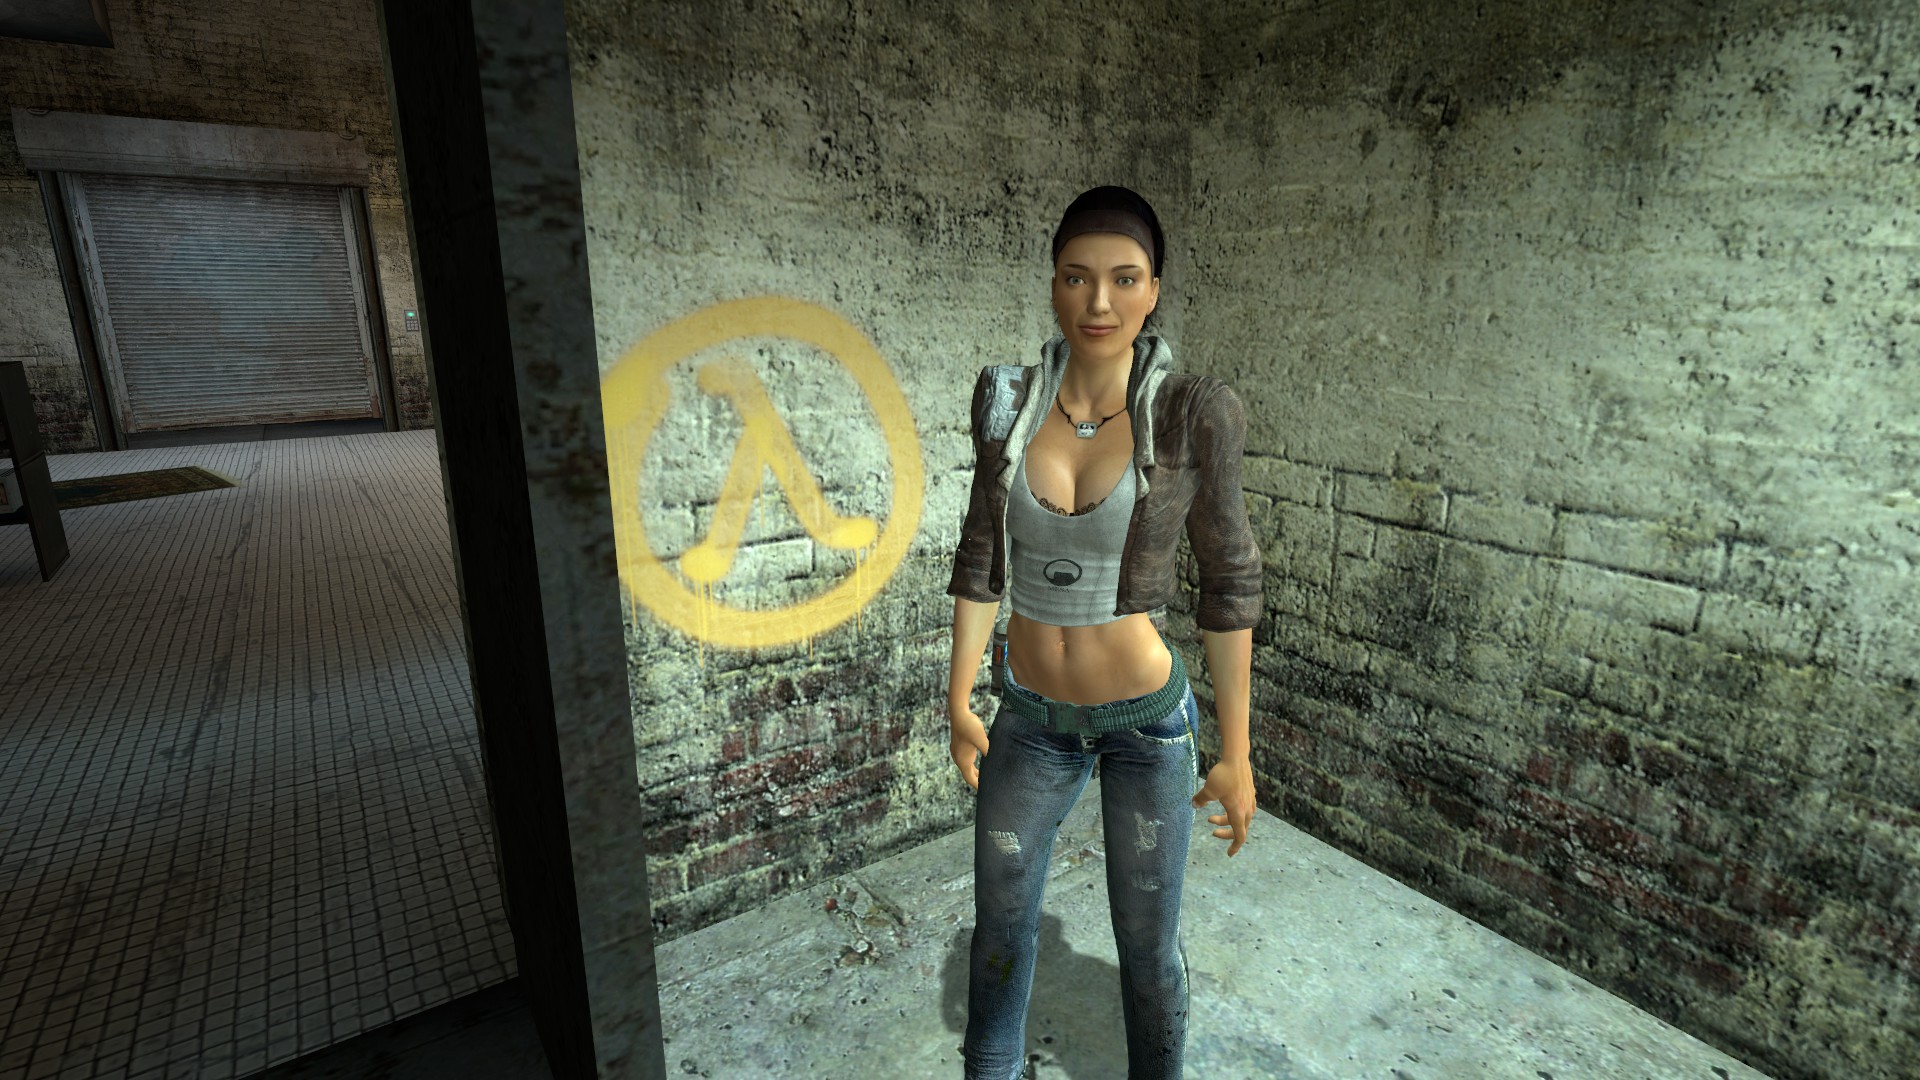 connie brunner recommends half life 2 nude mod pic